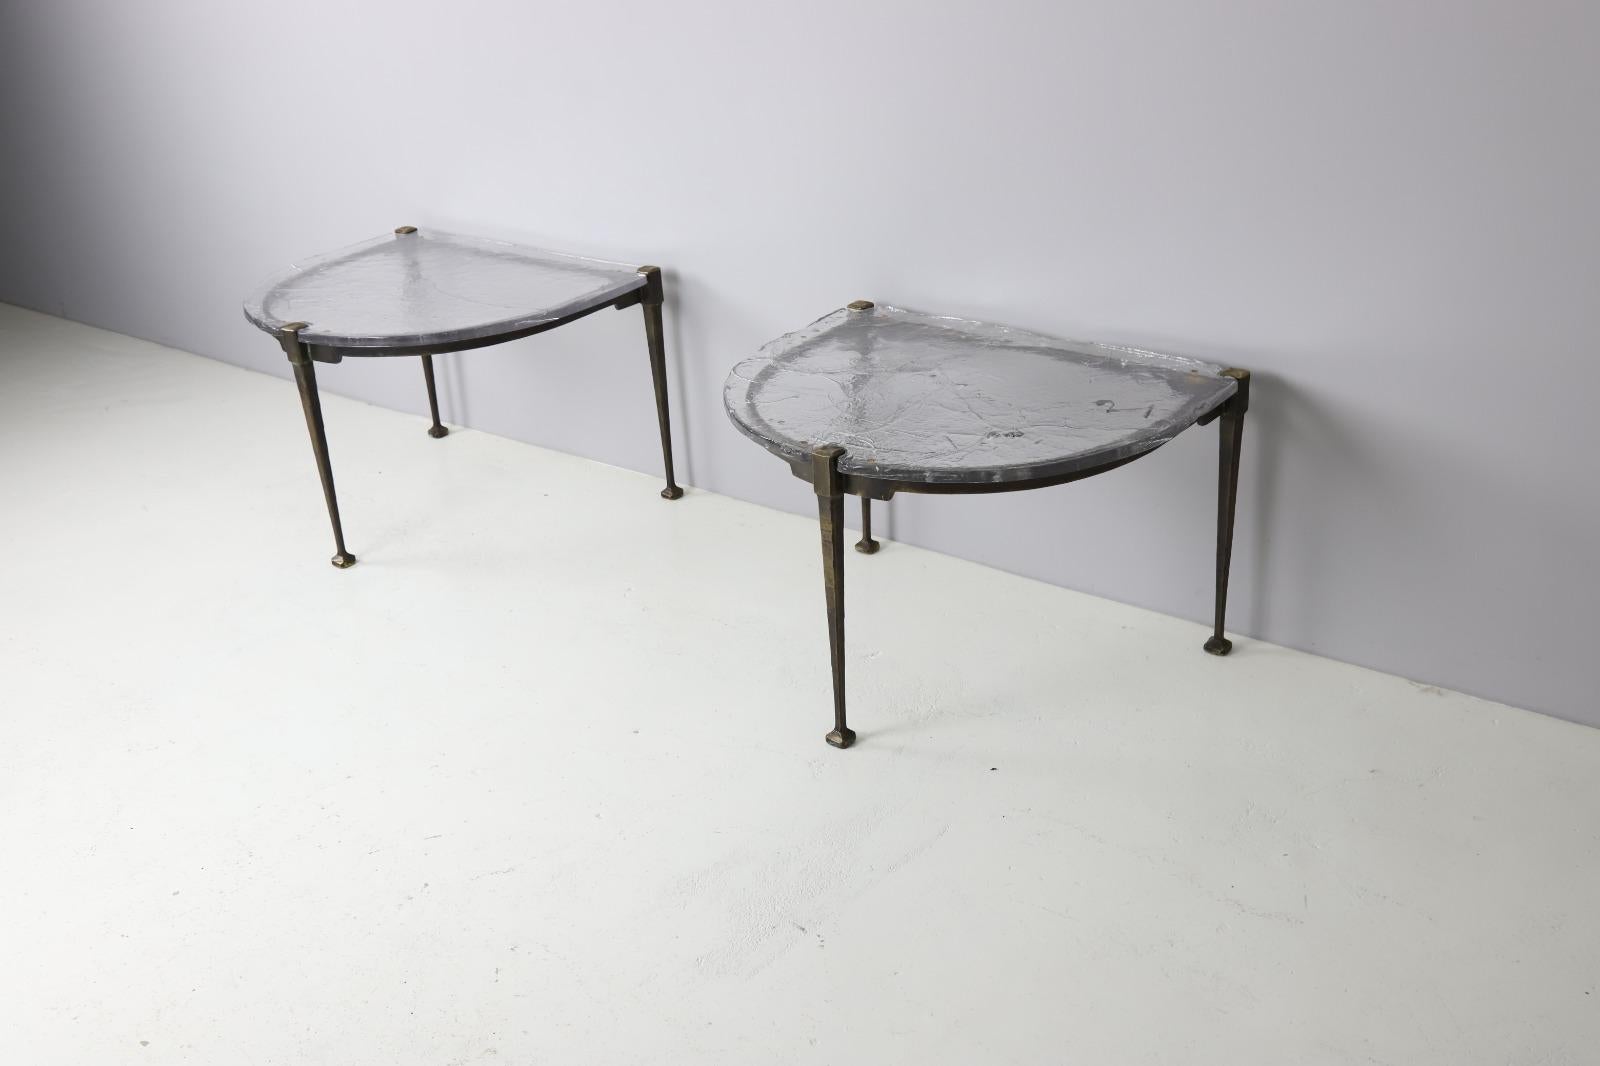 Monumental pair of side tables by Lothar Klute. Heavy forged bronze frames with a thick hand blown glass on top. Signed on the base and in the glass.
Very good original condition. Over the year the bronze has obtained a beautiful warm patina.